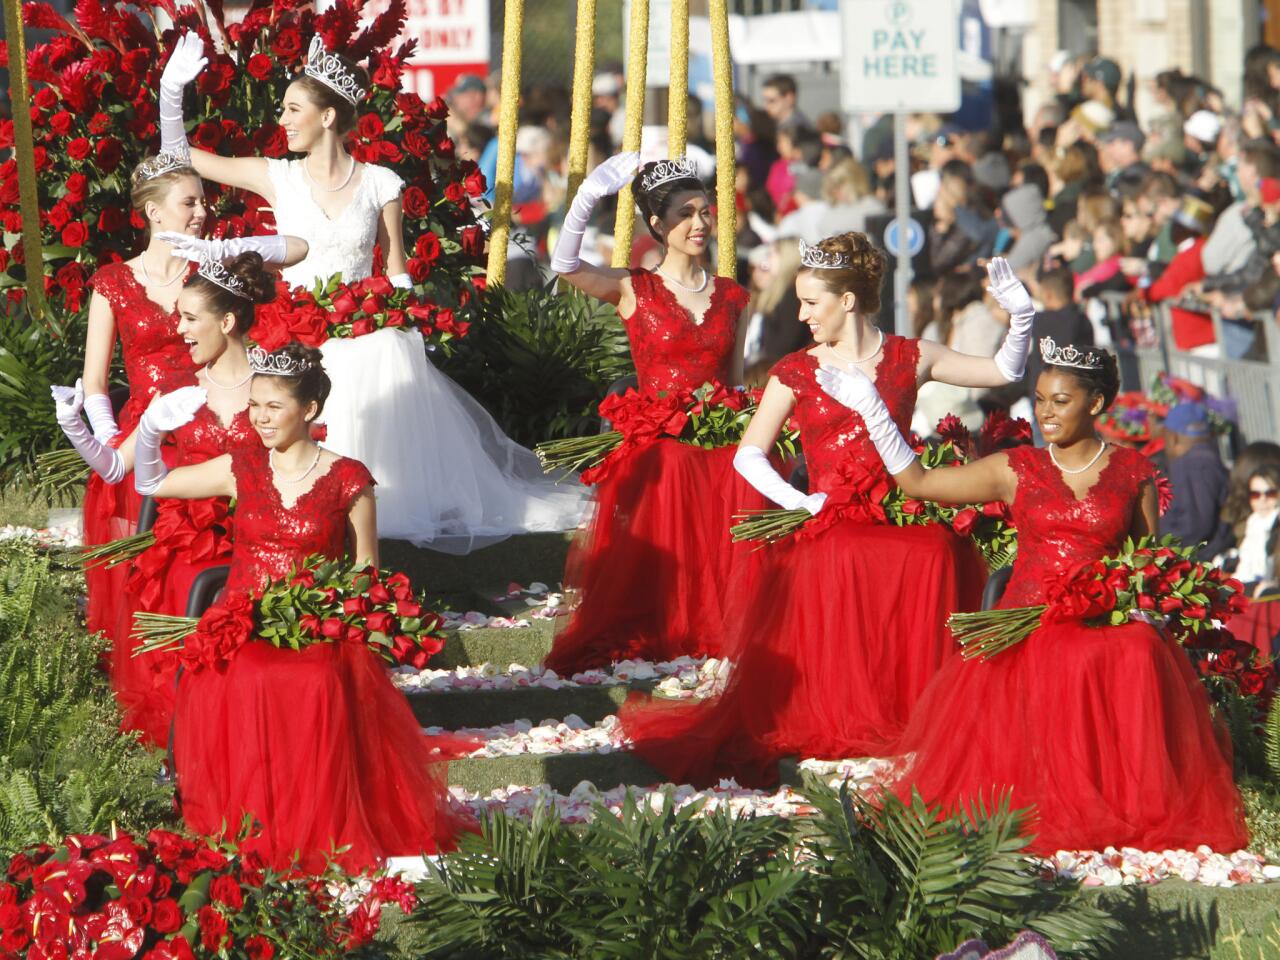 The Royal Court at the 2014 Rose Parade